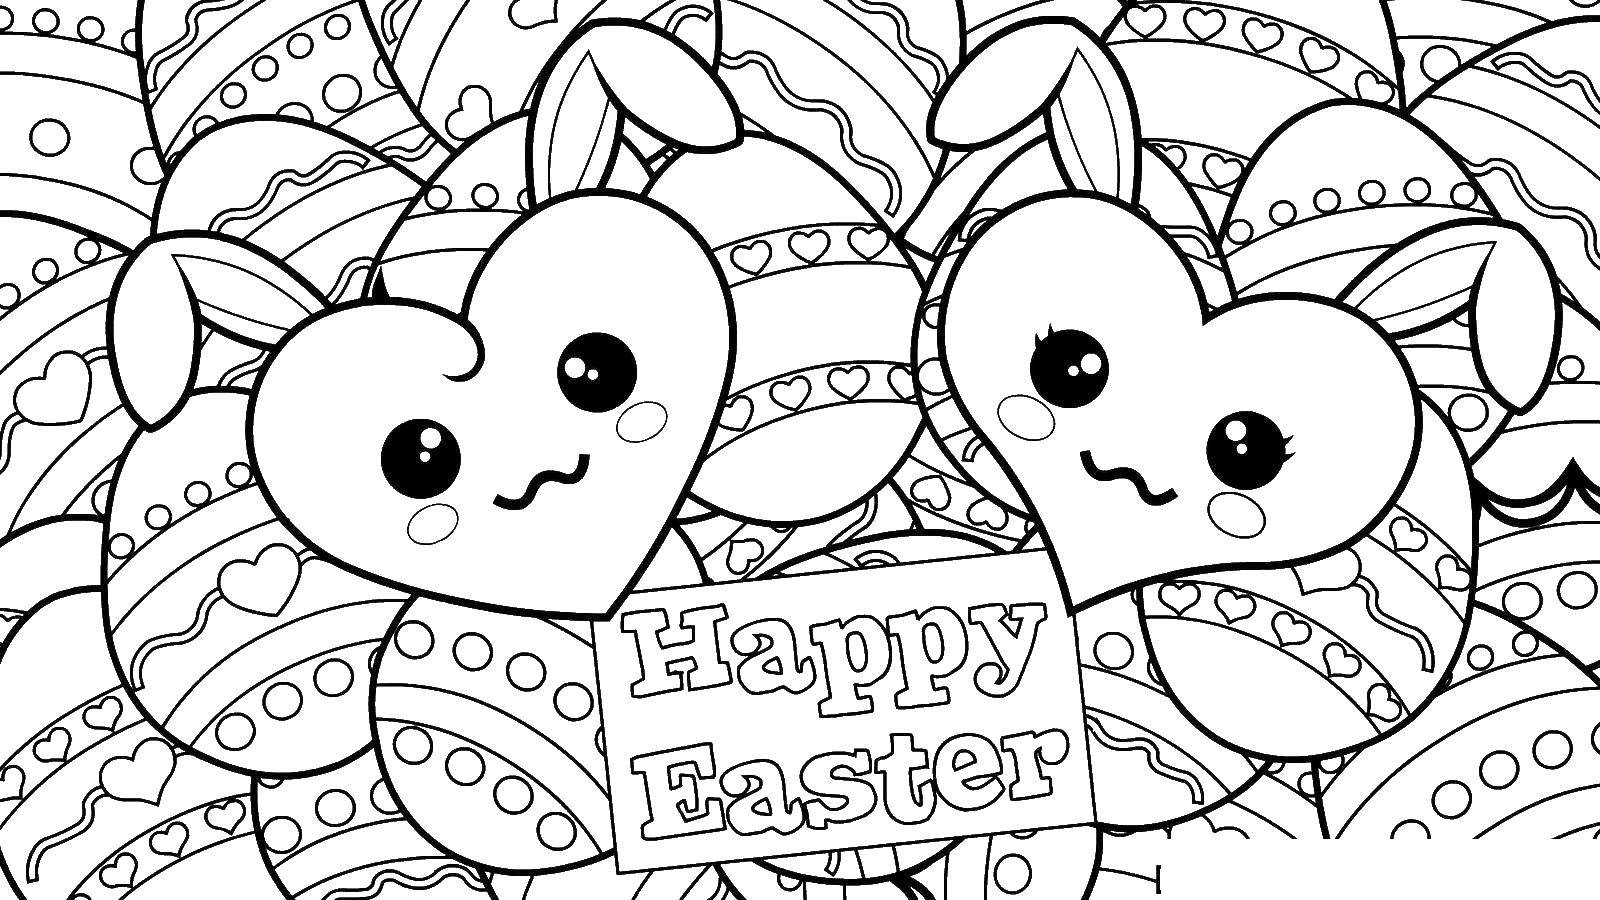 Coloring Easter eggs for the holiday. Category greetings. Tags:  congratulations, Easter.